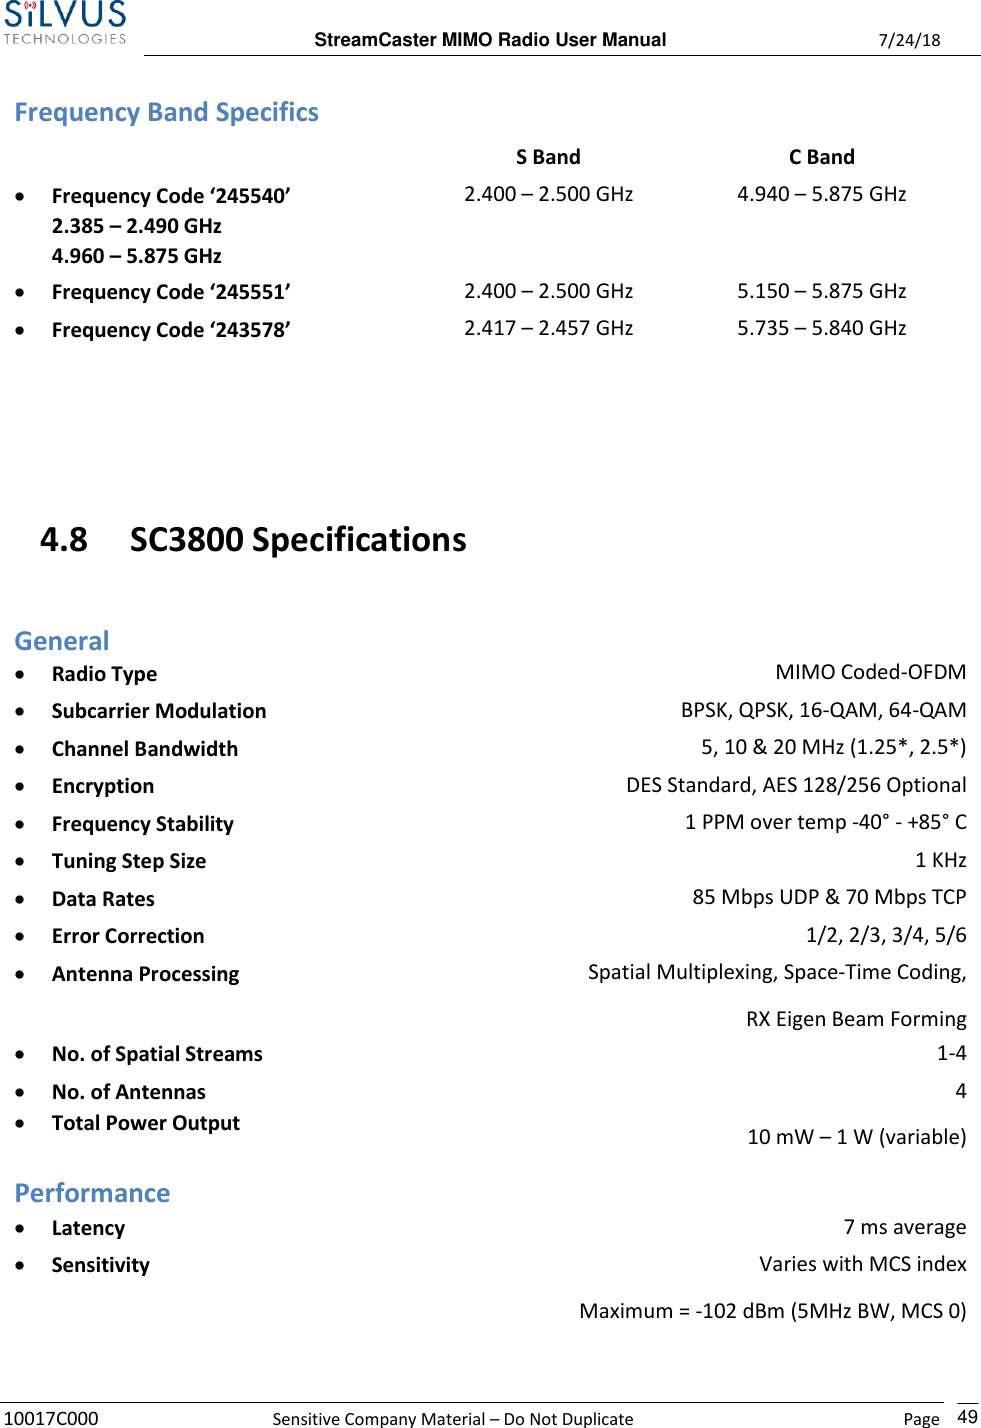  StreamCaster MIMO Radio User Manual  7/24/18 10017C000  Sensitive Company Material – Do Not Duplicate    Page    49 Frequency Band Specifics  S Band C Band • Frequency Code ‘245540’ 2.385 – 2.490 GHz   4.960 – 5.875 GHz 2.400 – 2.500 GHz 4.940 – 5.875 GHz • Frequency Code ‘245551’ •  2.400 – 2.500 GHz 5.150 – 5.875 GHz • Frequency Code ‘243578’ •  2.417 – 2.457 GHz 5.735 – 5.840 GHz   4.8 SC3800 Specifications General • Radio Type MIMO Coded-OFDM • Subcarrier Modulation BPSK, QPSK, 16-QAM, 64-QAM • Channel Bandwidth 5, 10 &amp; 20 MHz (1.25*, 2.5*) • Encryption DES Standard, AES 128/256 Optional • Frequency Stability 1 PPM over temp -40° - +85° C • Tuning Step Size 1 KHz • Data Rates 85 Mbps UDP &amp; 70 Mbps TCP • Error Correction 1/2, 2/3, 3/4, 5/6 • Antenna Processing Spatial Multiplexing, Space-Time Coding, RX Eigen Beam Forming • No. of Spatial Streams 1-4 • No. of Antennas • Total Power Output 4 10 mW – 1 W (variable)  Performance • Latency 7 ms average • Sensitivity Varies with MCS index Maximum = -102 dBm (5MHz BW, MCS 0) (5 MHz BW, MCS 0) 